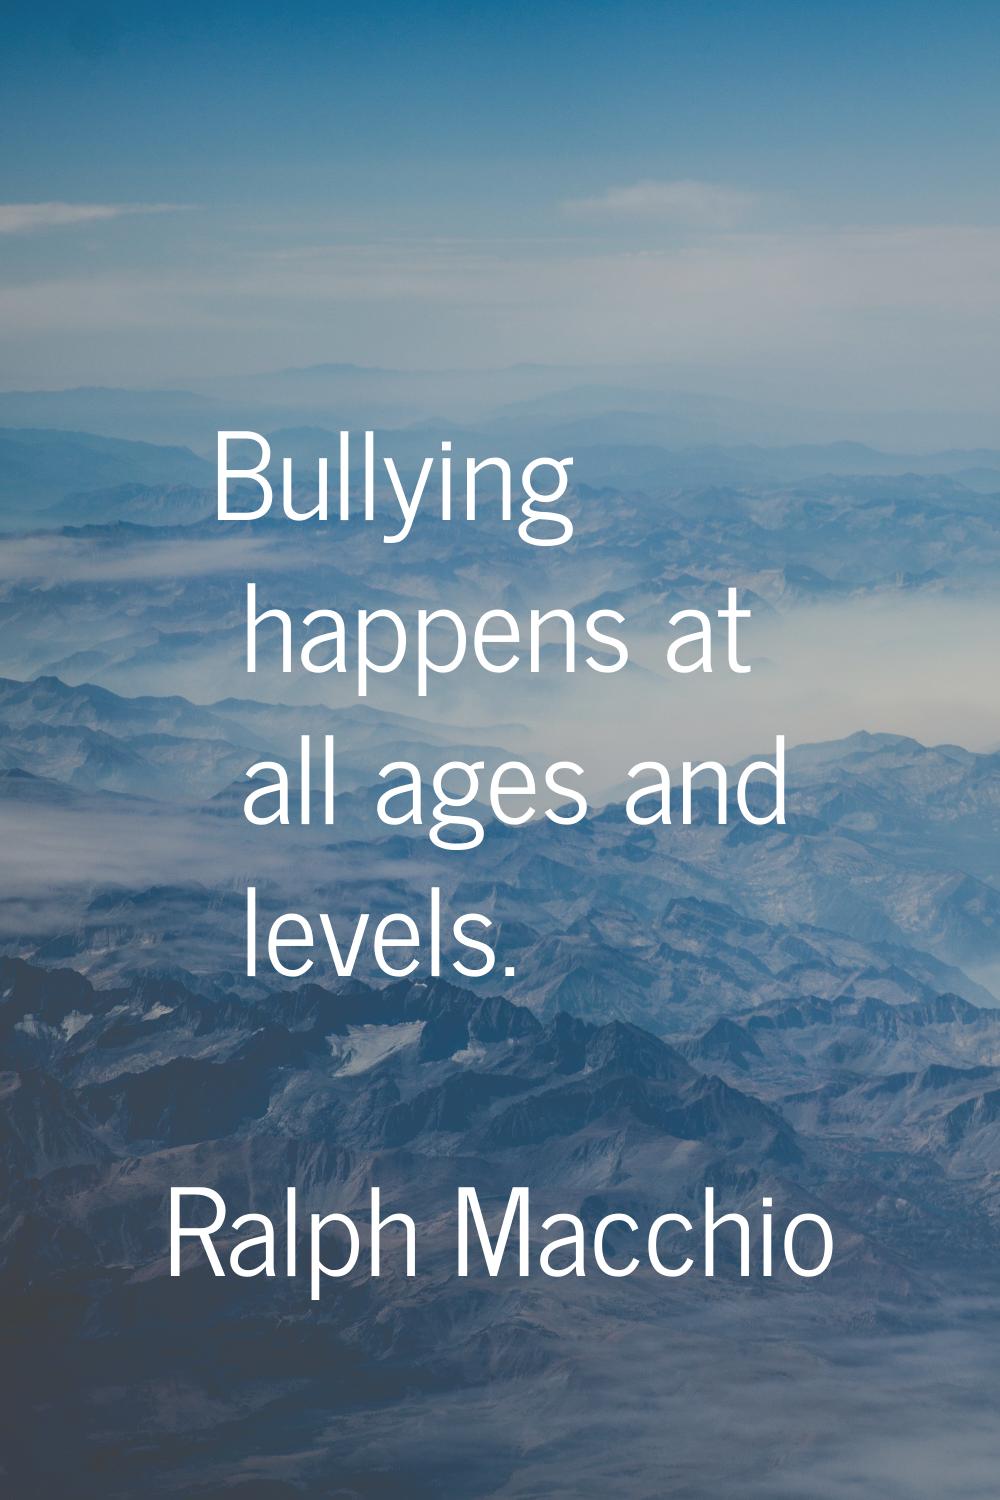 Bullying happens at all ages and levels.